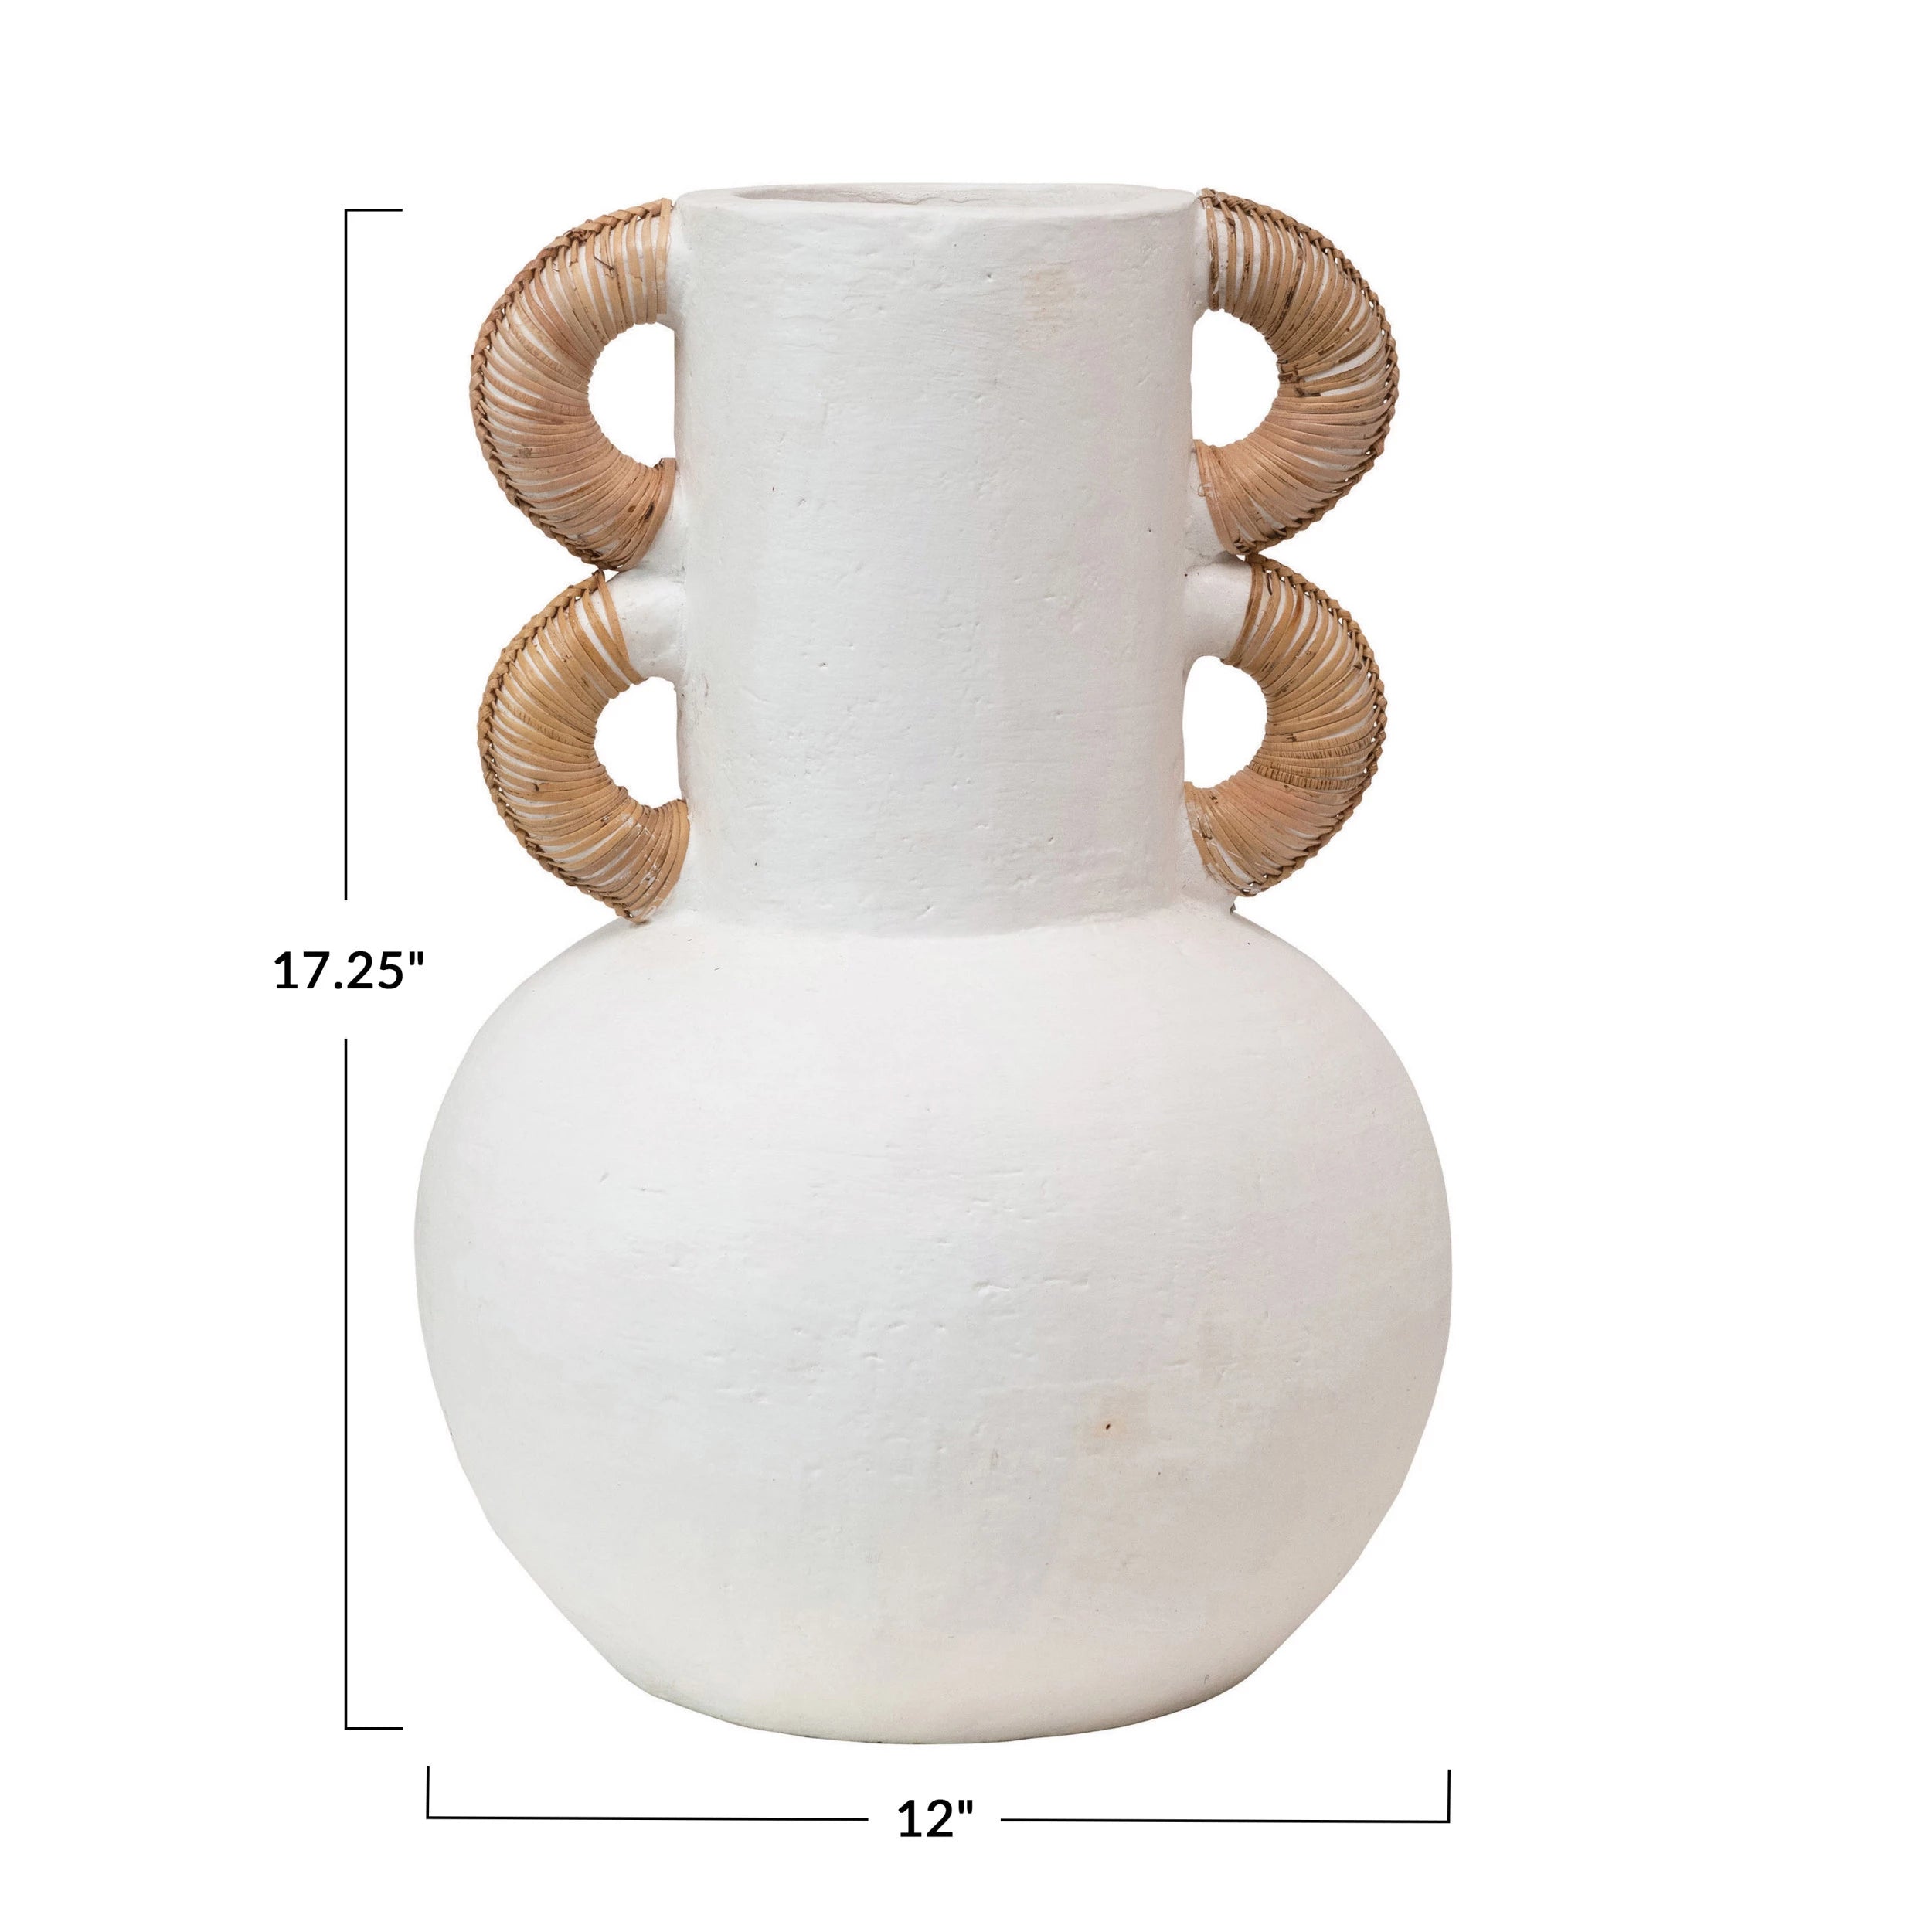 Terra-cotta Vase with Rattan Wrapped Handles